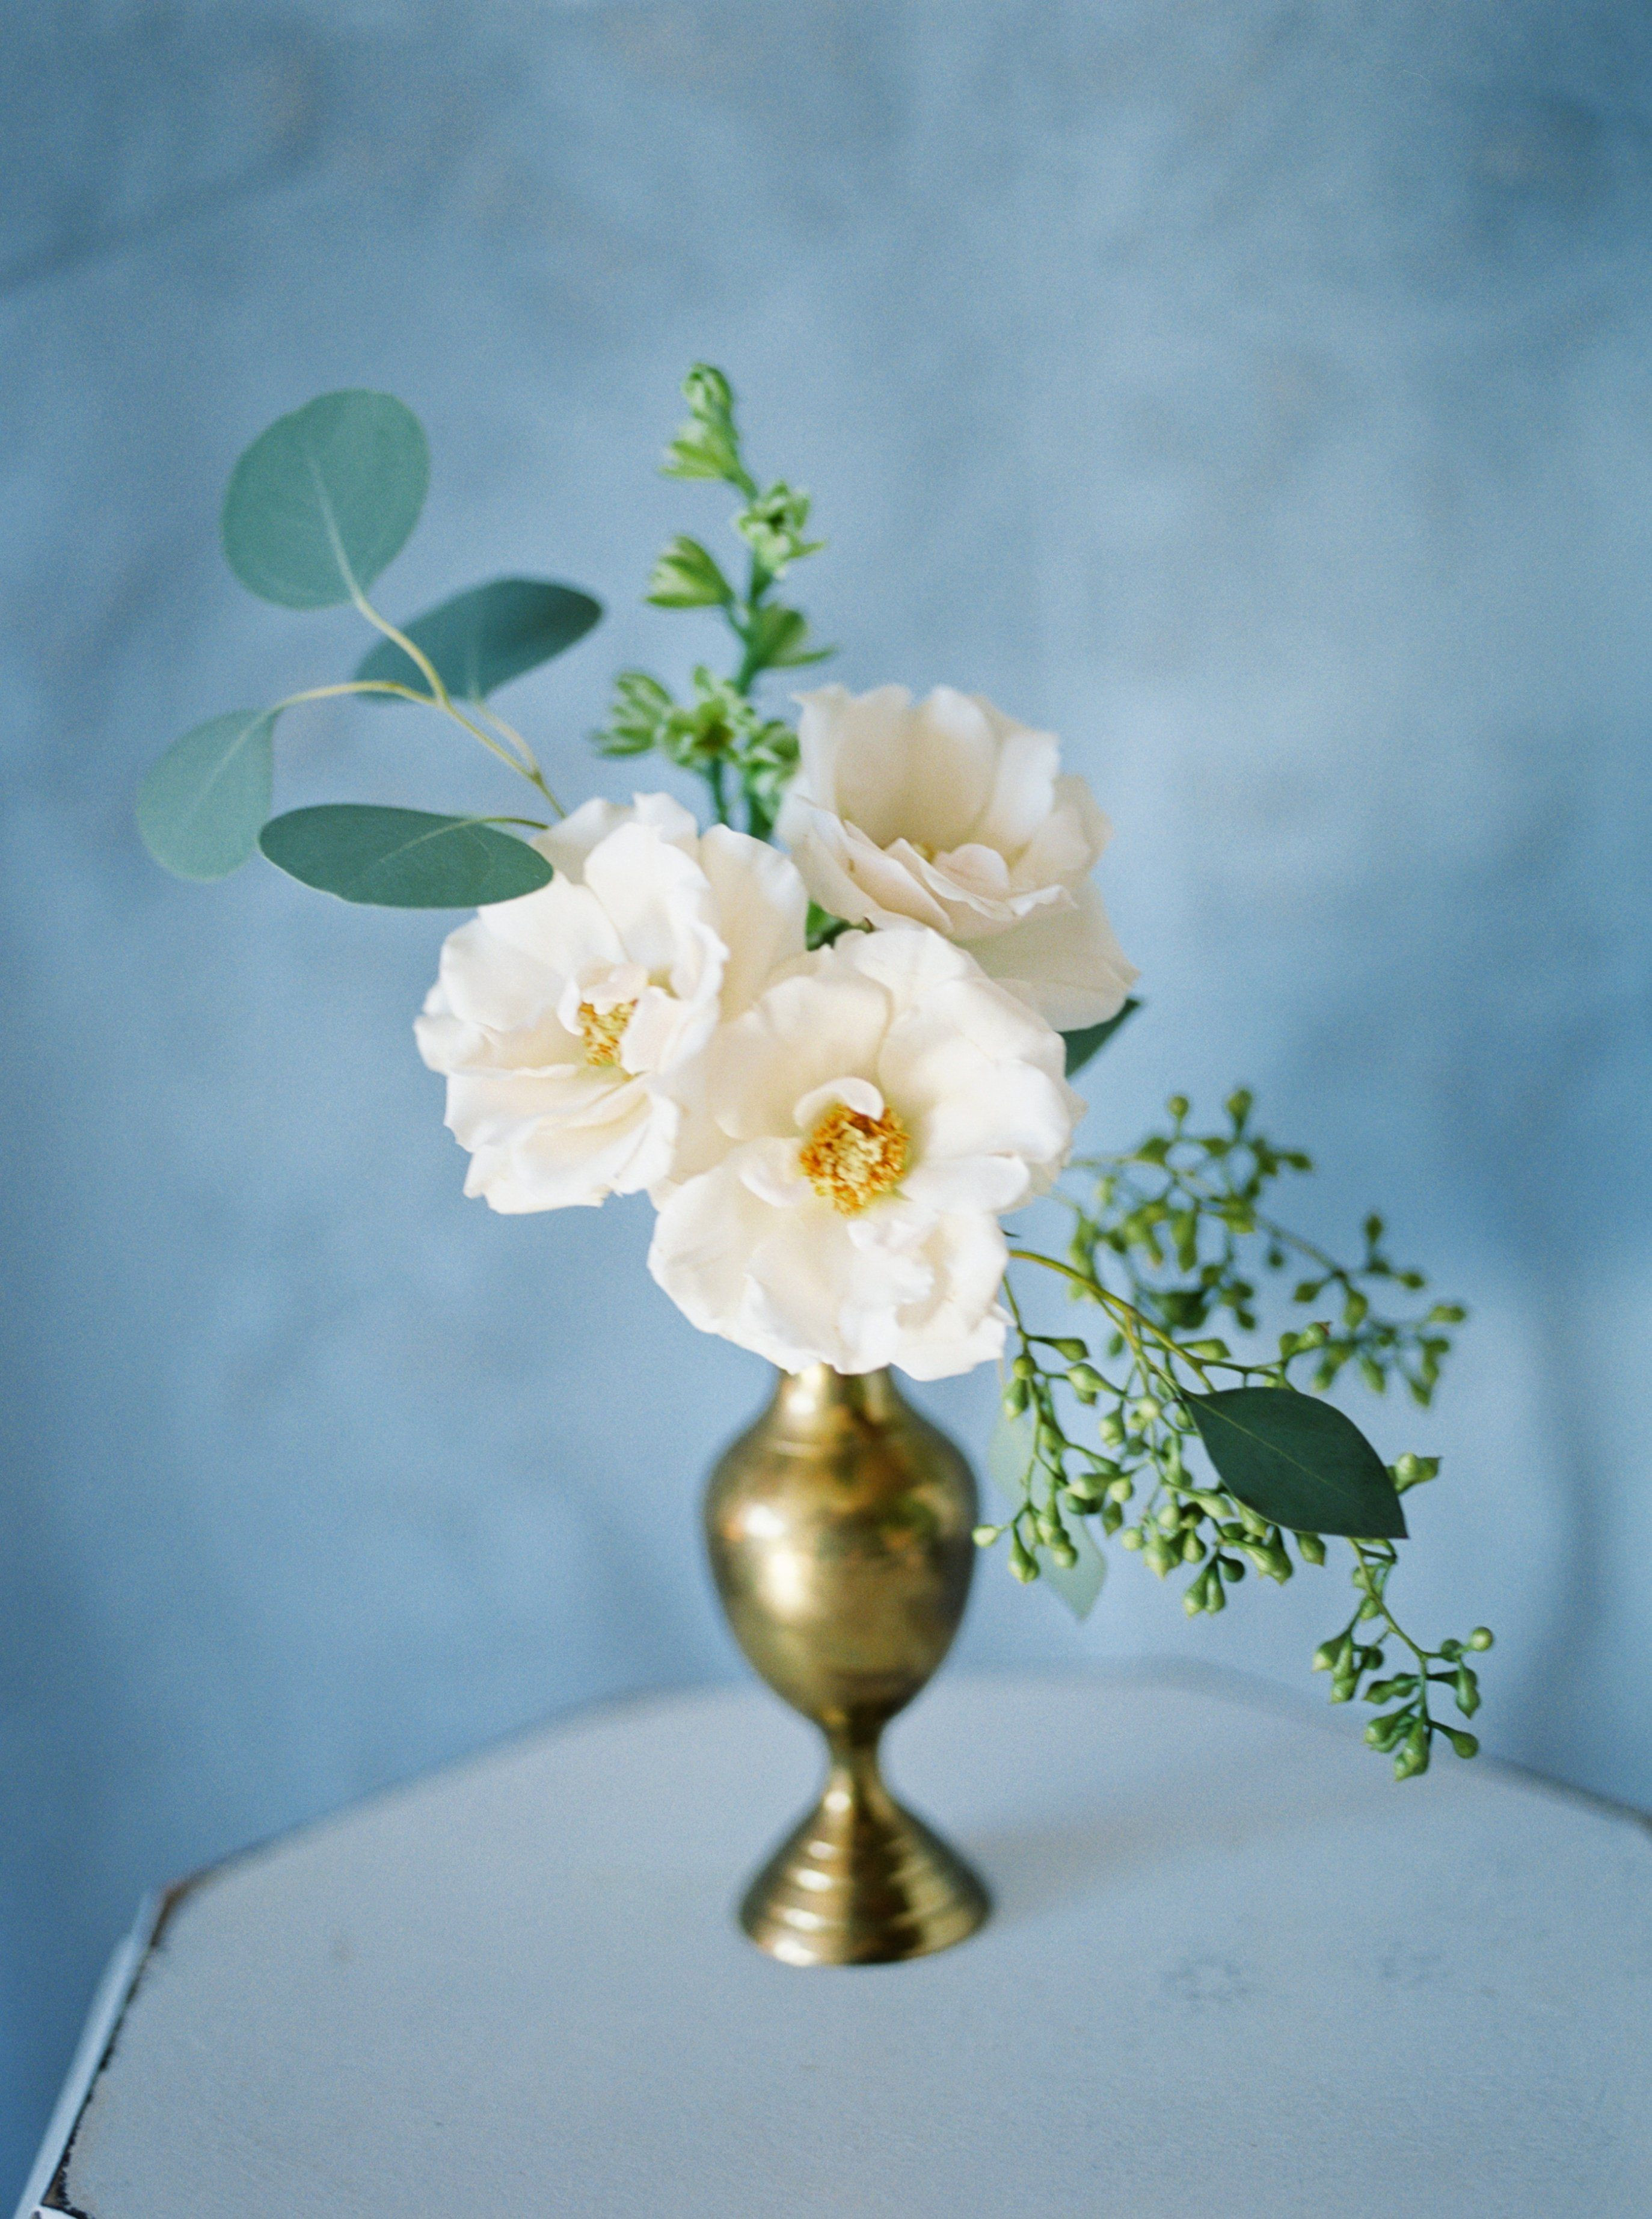 10 Perfect Brass Compote Vase 2022 free download brass compote vase of bud vase arrangement in brass vase majolica spray rose and with regard to bud vase arrangement in brass vase majolica spray rose and eucalyptus flowers by lily and mint